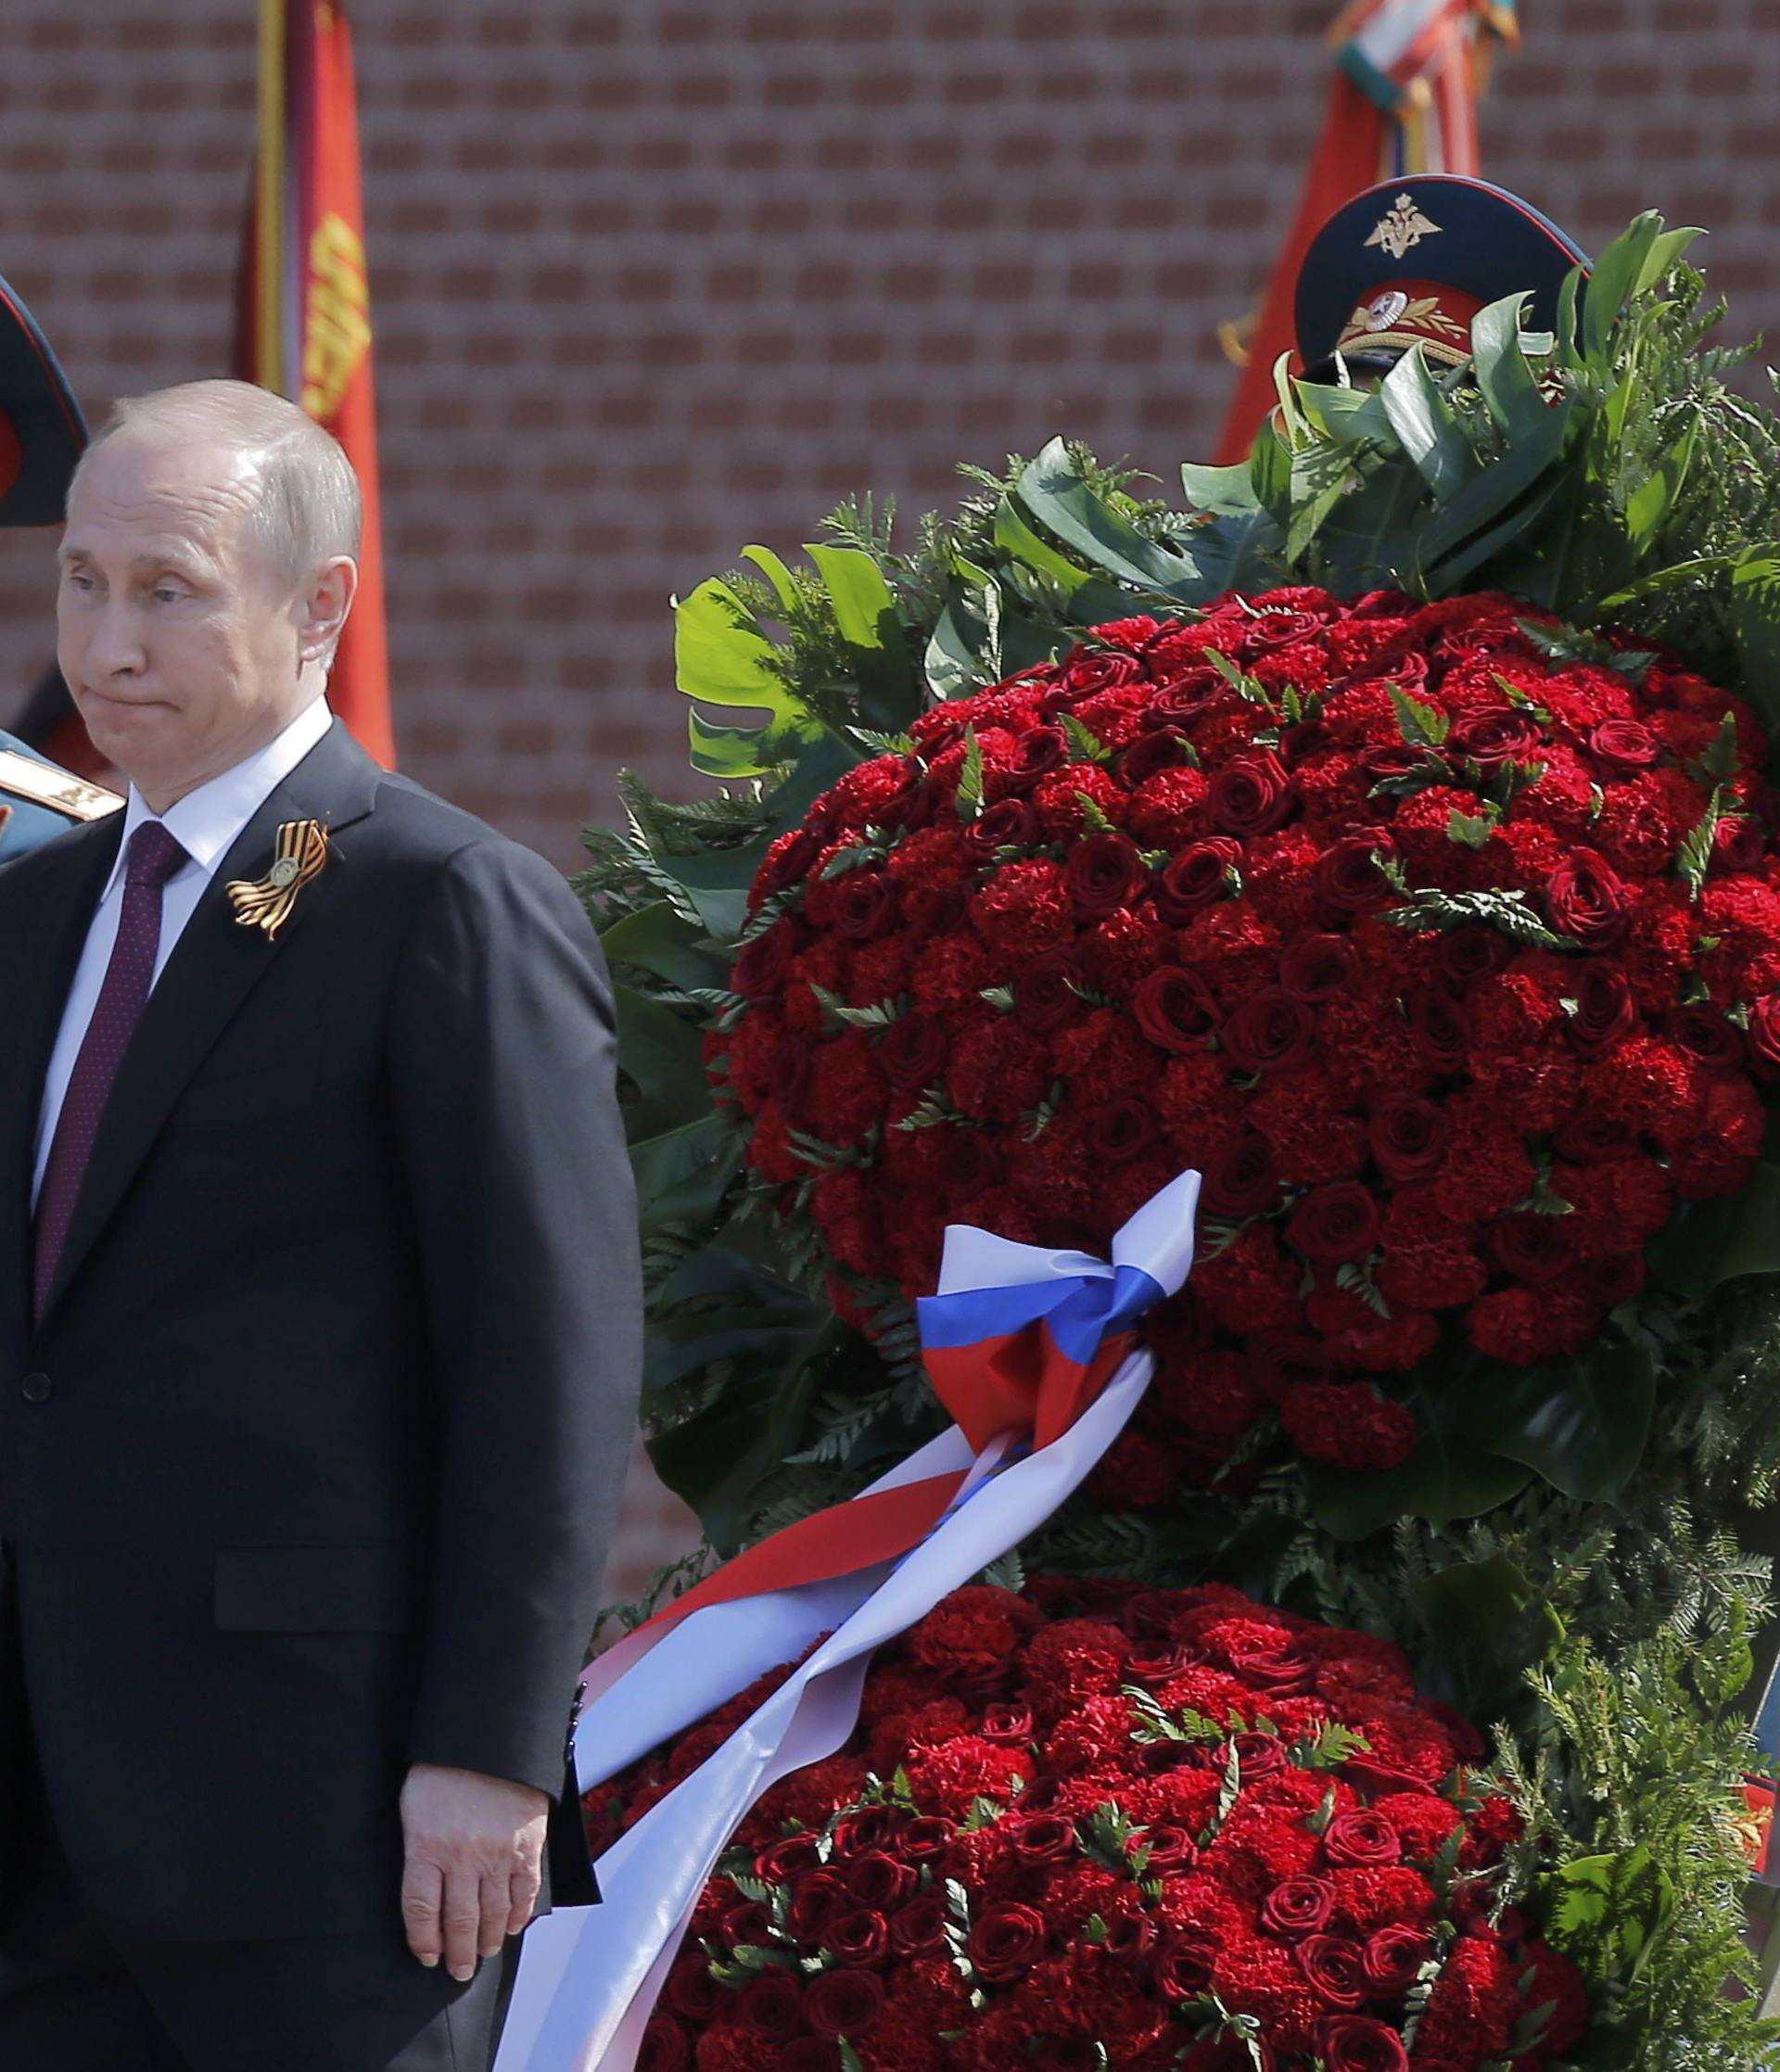 Russian President Putin attends wreath-laying ceremony to mark end of World War Two at Tomb of Unknown Soldier by Kremlin walls in Moscow